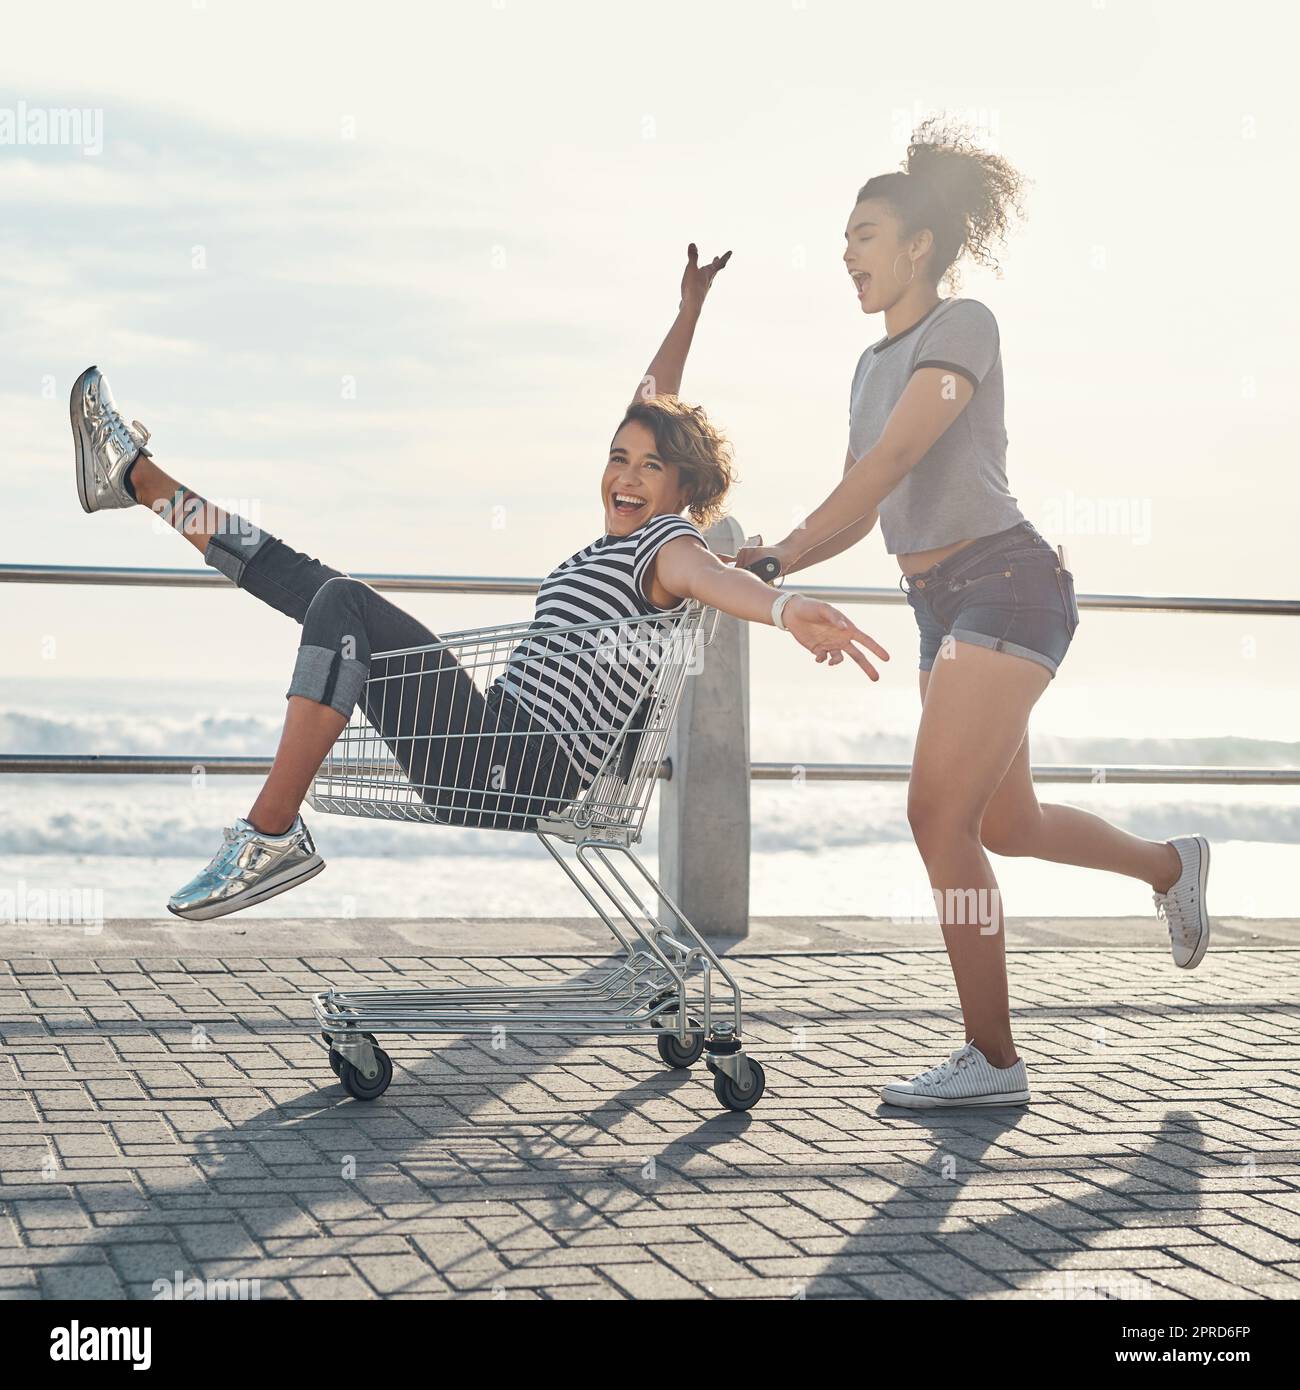 Good friends is the greatest gift. a young woman pushing her friend around on the promenade in a shopping chart. Stock Photo